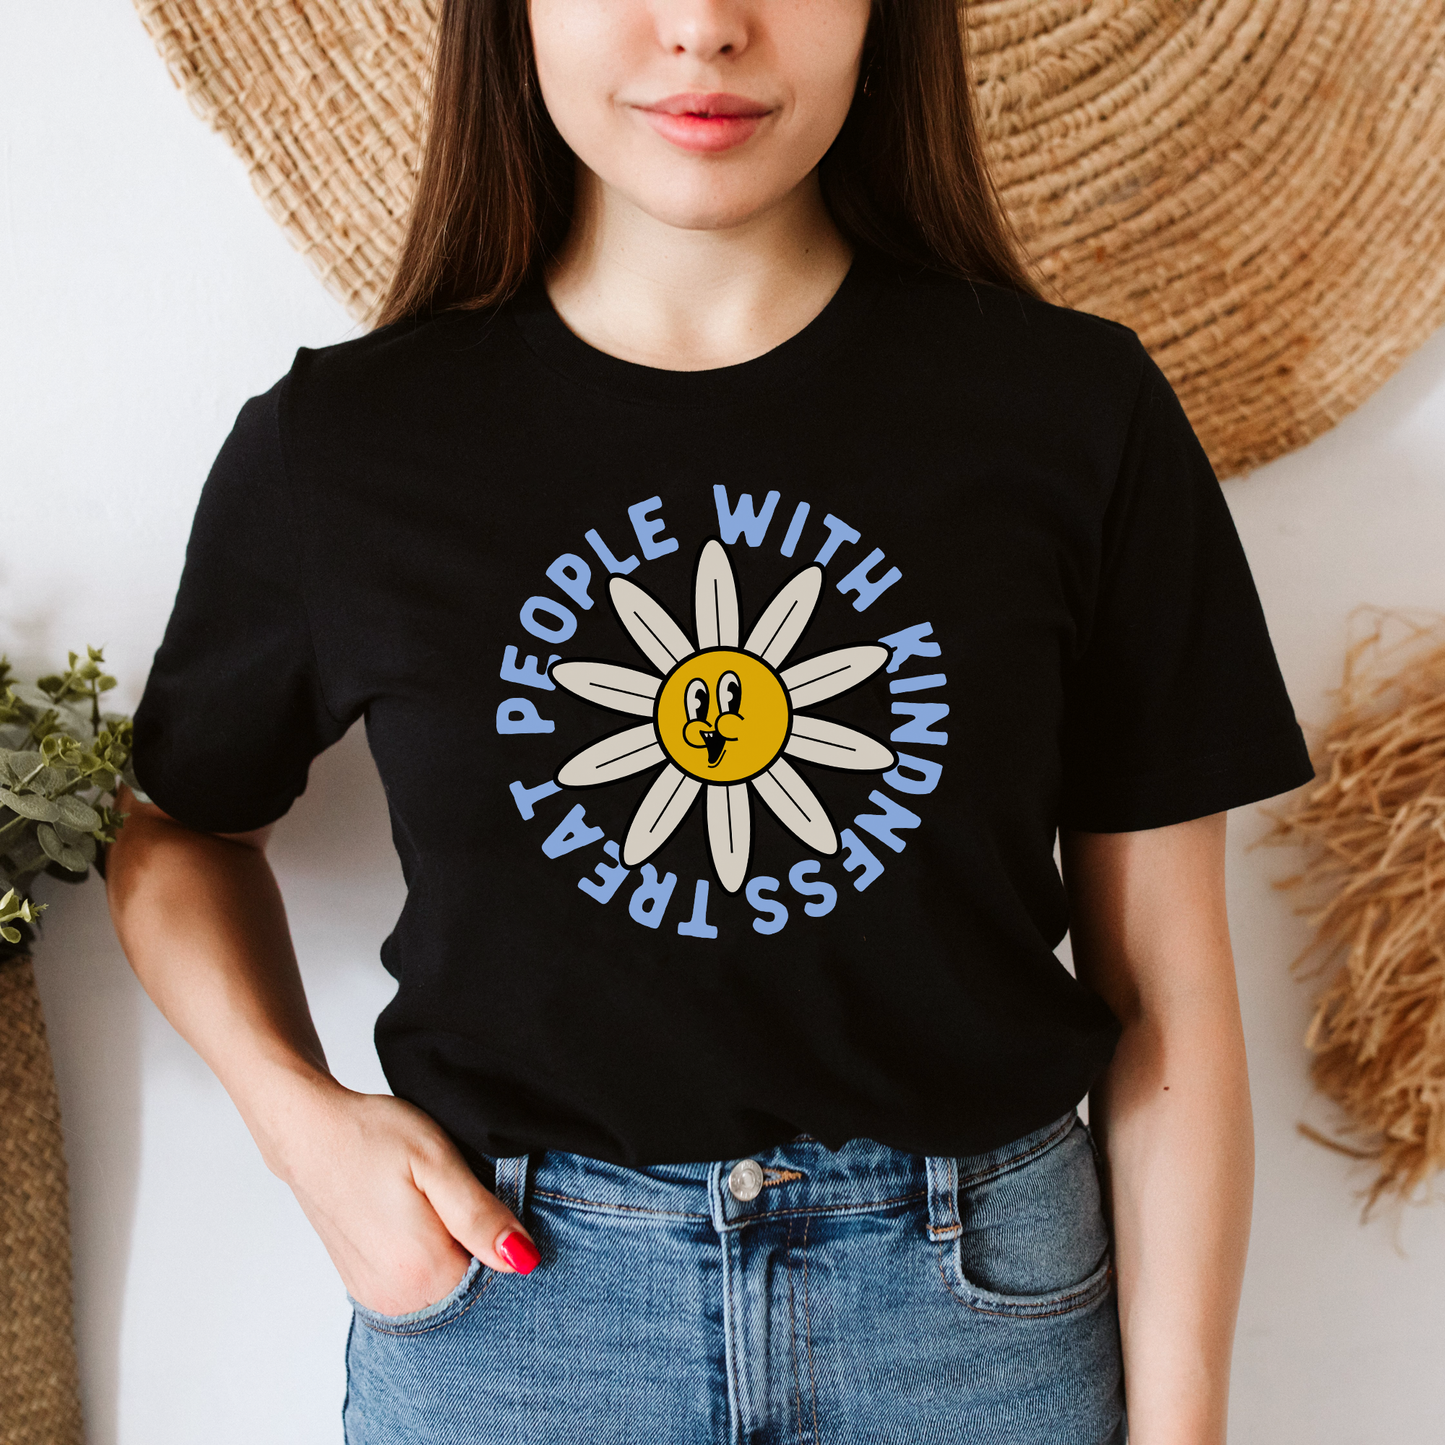 Daisy Treat People With Kindness Harry Styles T-Shirt